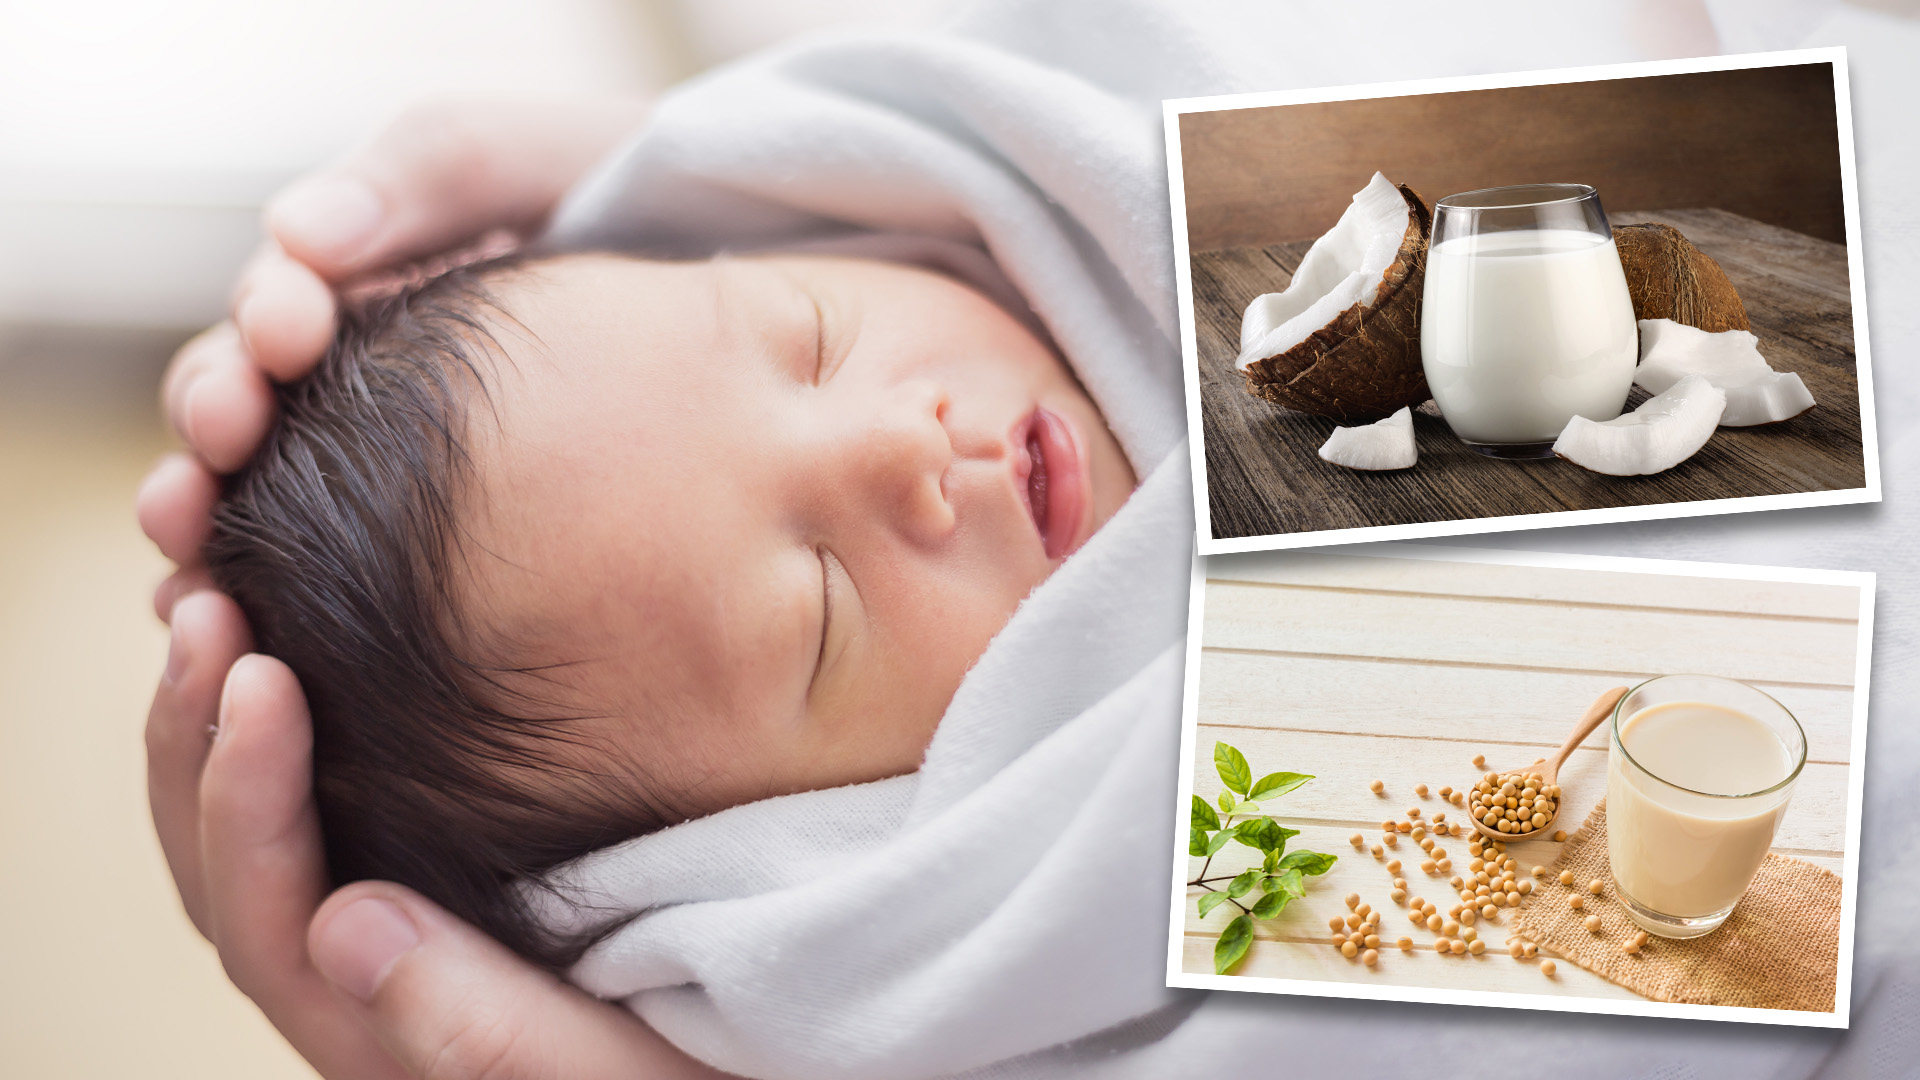 Public opinion shocked in China as doctor reveals a vegetarian couple asked which was better — coconut milk pulp or soy milk for feeding a one-day-old baby. Photo: SCMP composite/handout